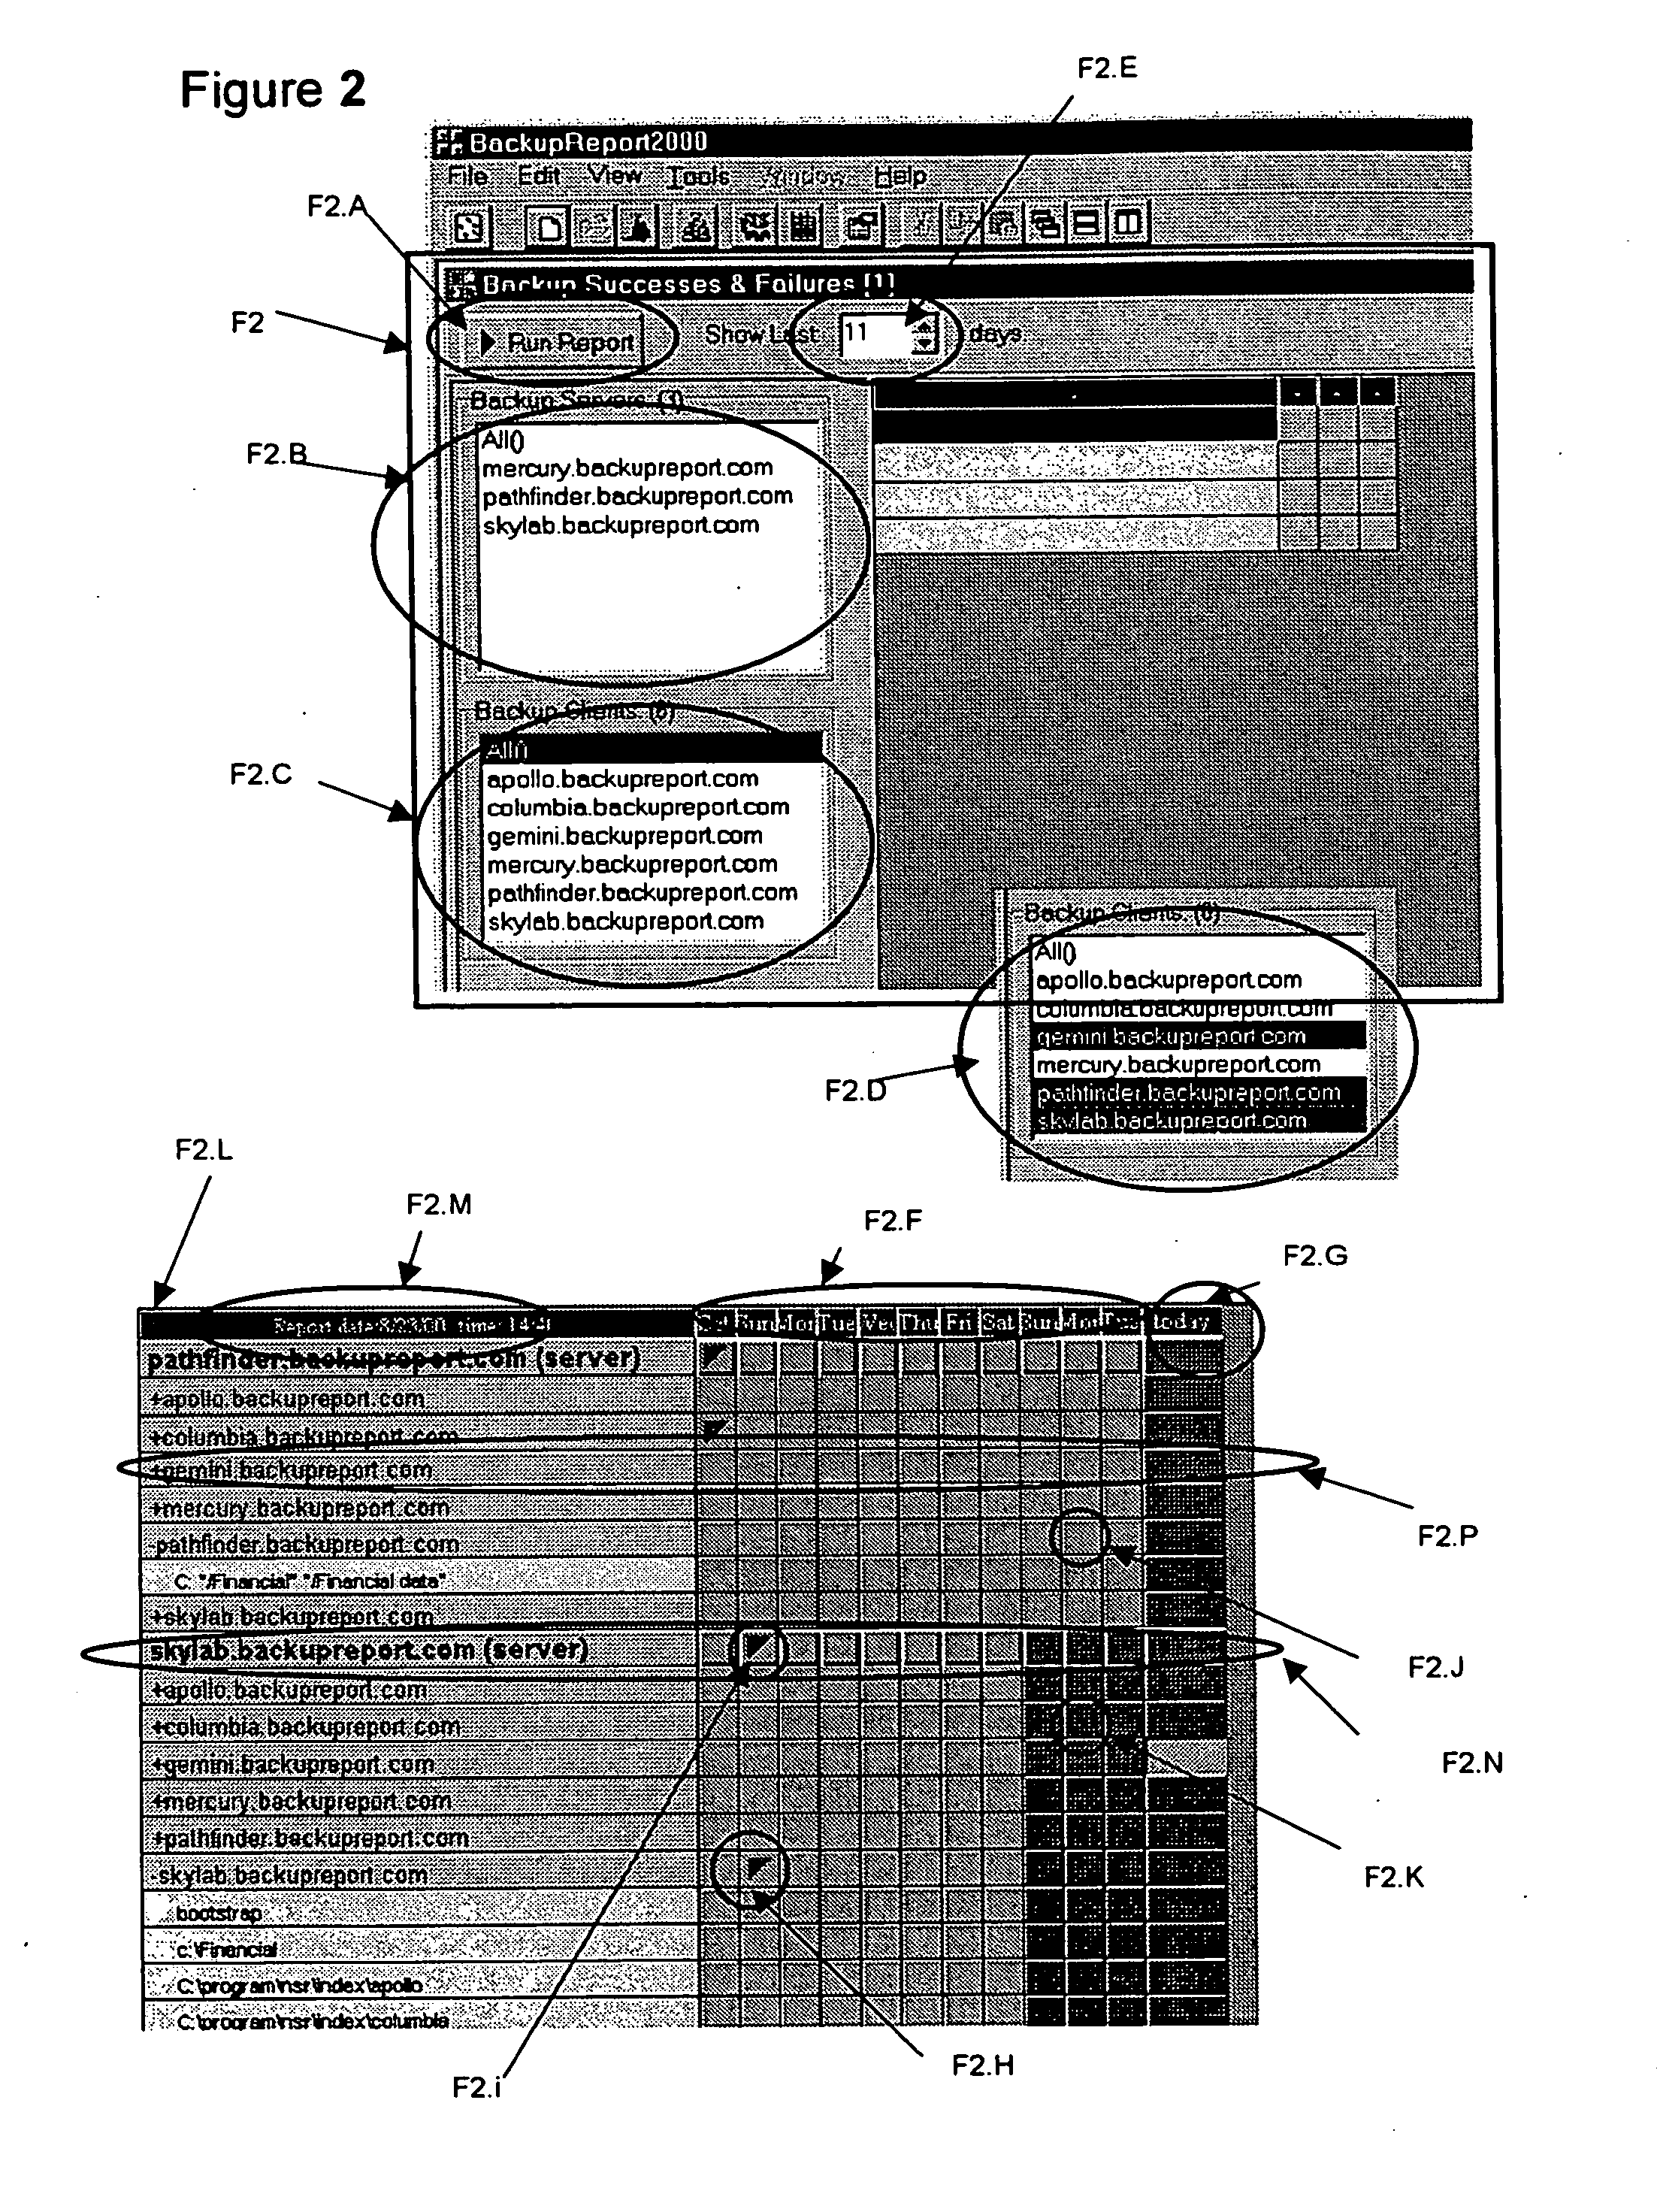 Method for visualizing data backup activity from a plurality of backup devices